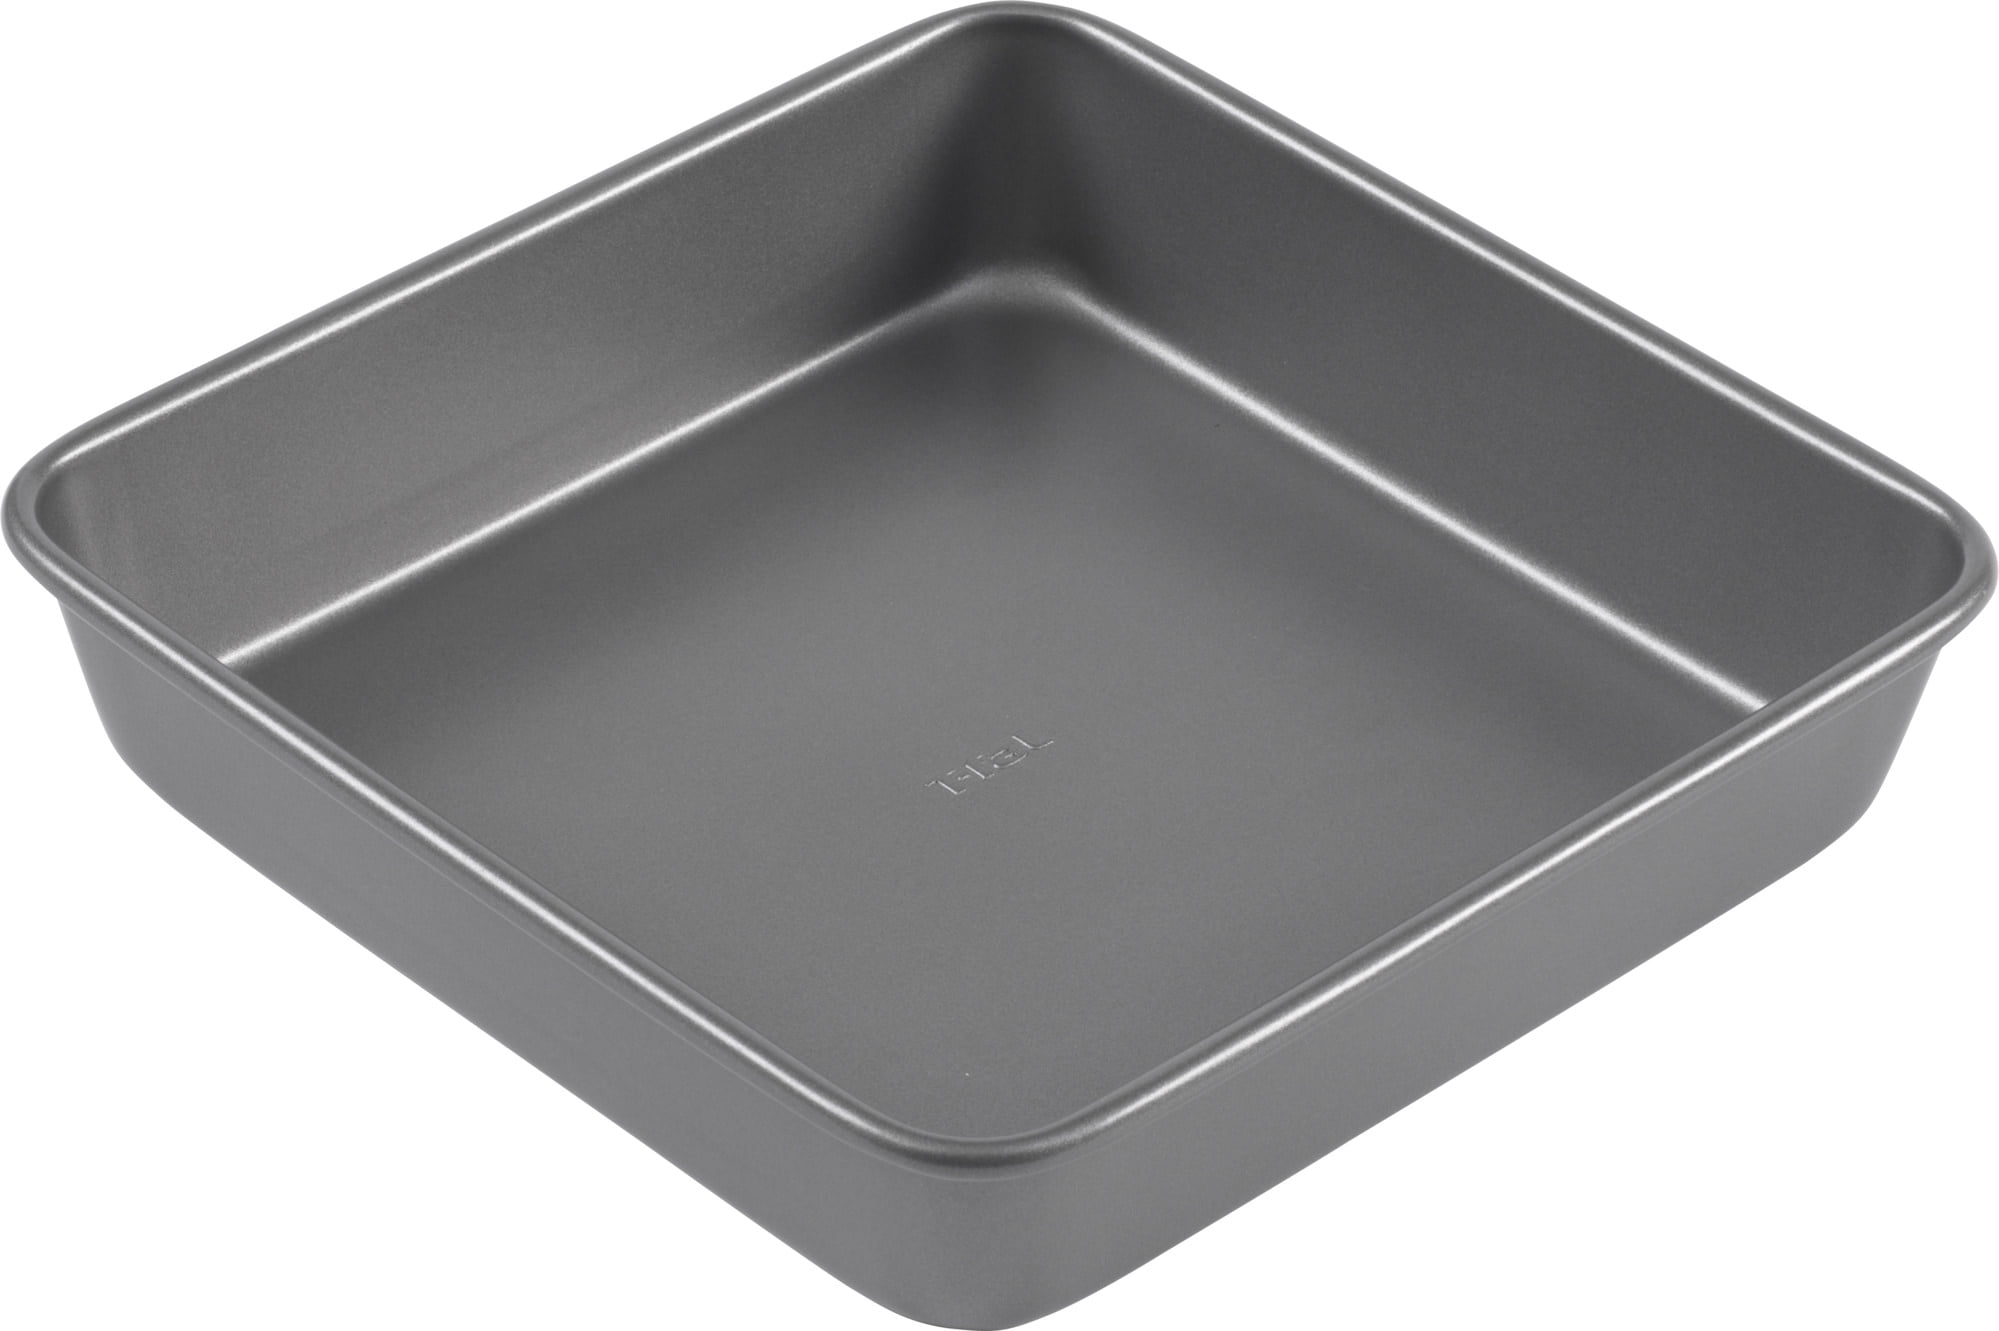 T-fal 84881 Commercial Nonstick Square Cake Pan, 9 x 9-Inch - Walmart.com